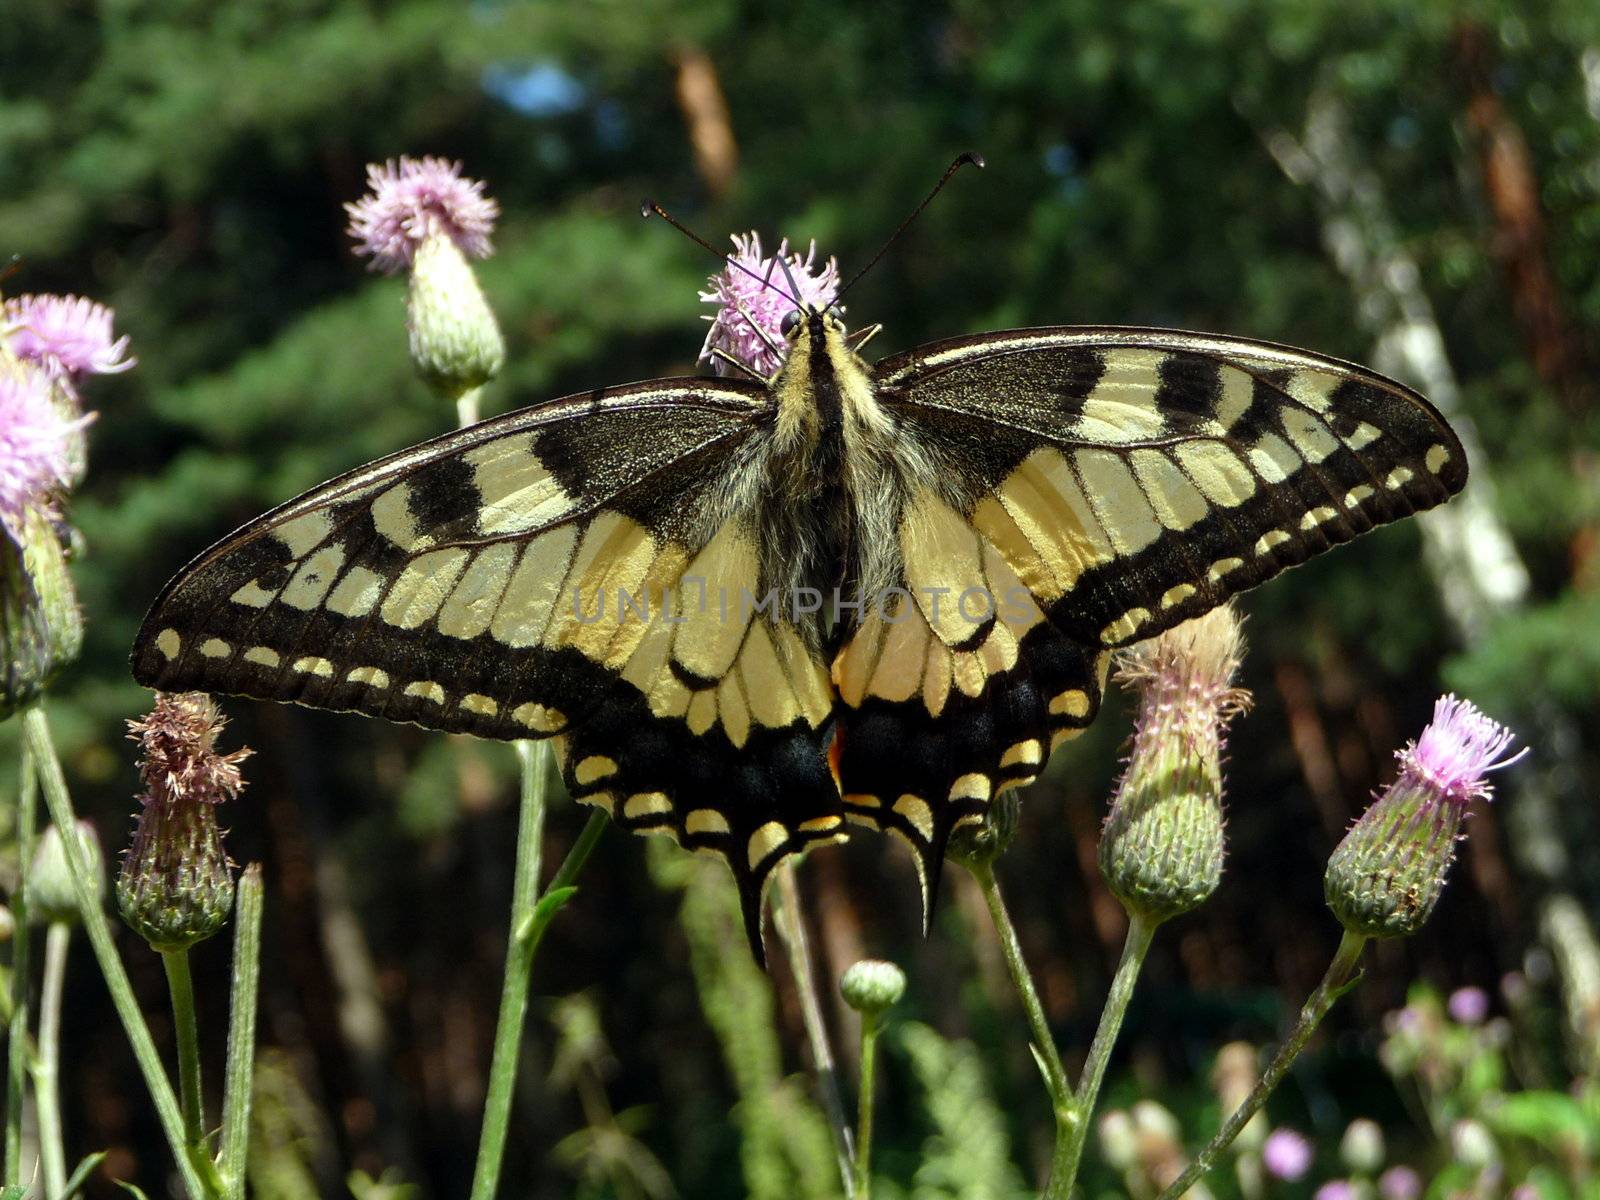 Swallowtail butterfly by tomatto